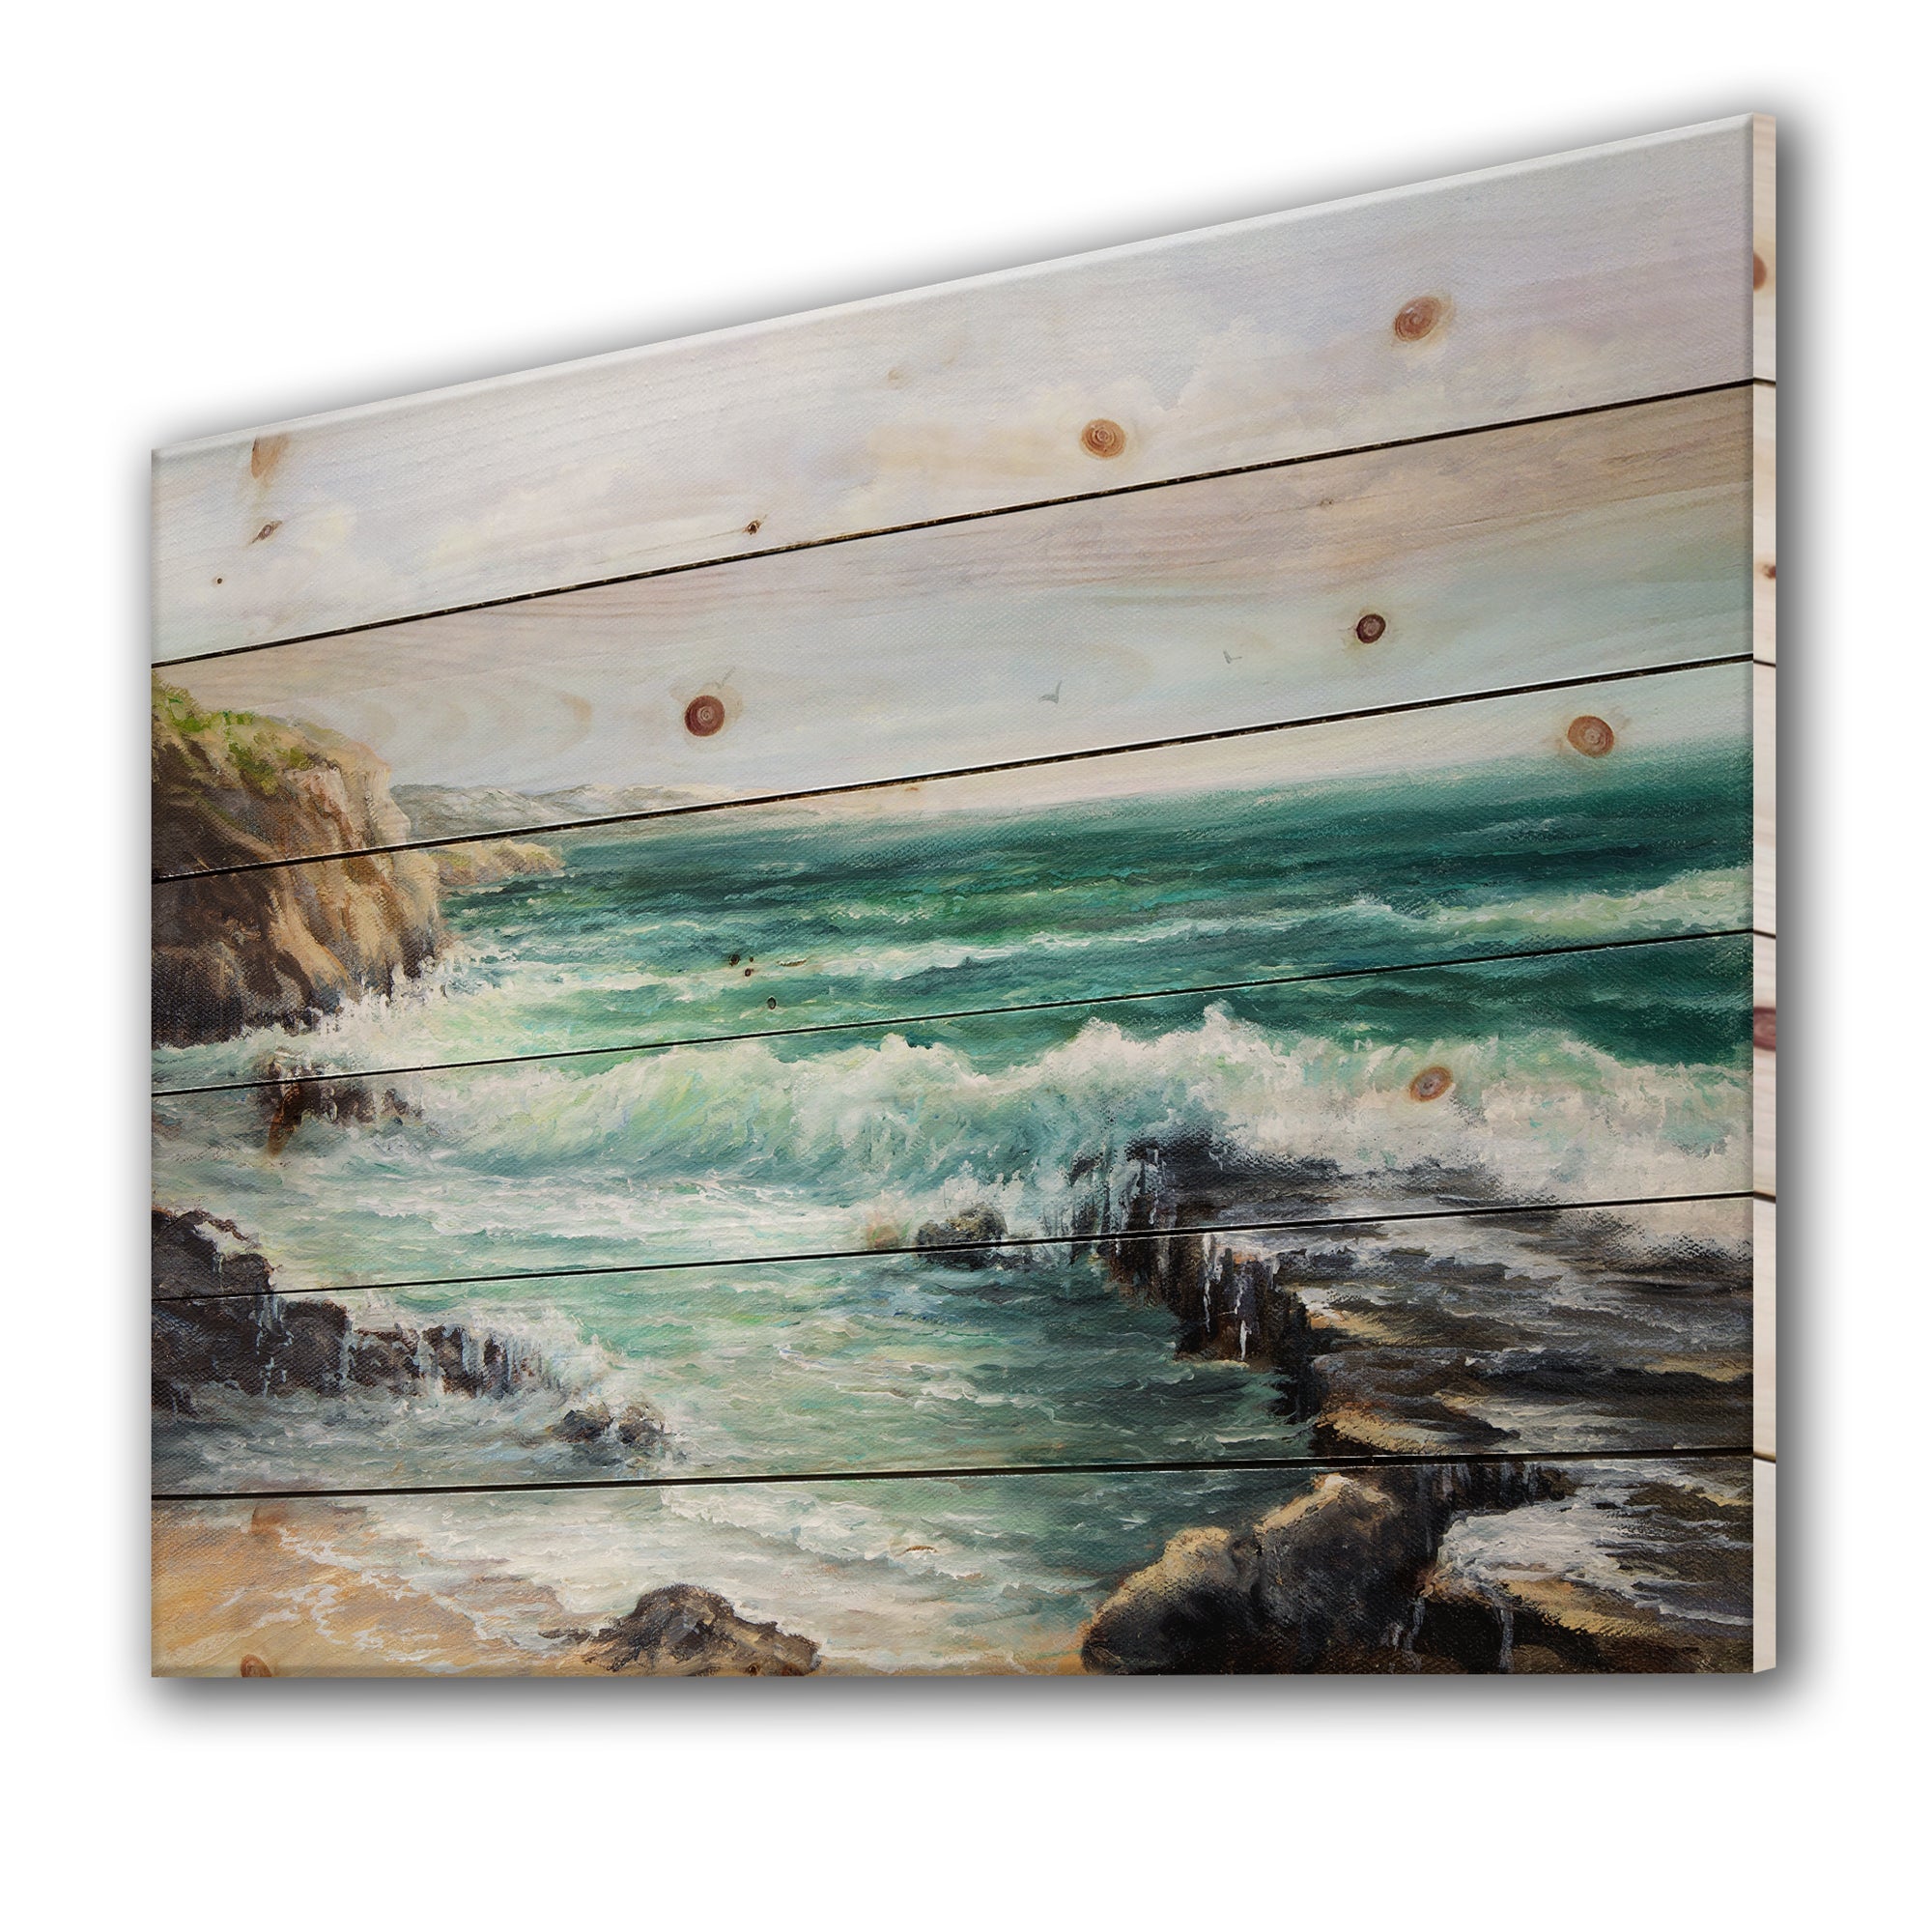 Cliff Overlooking Wild Waves Of The Ocean - Nautical & Coastal Print on Natural Pine Wood